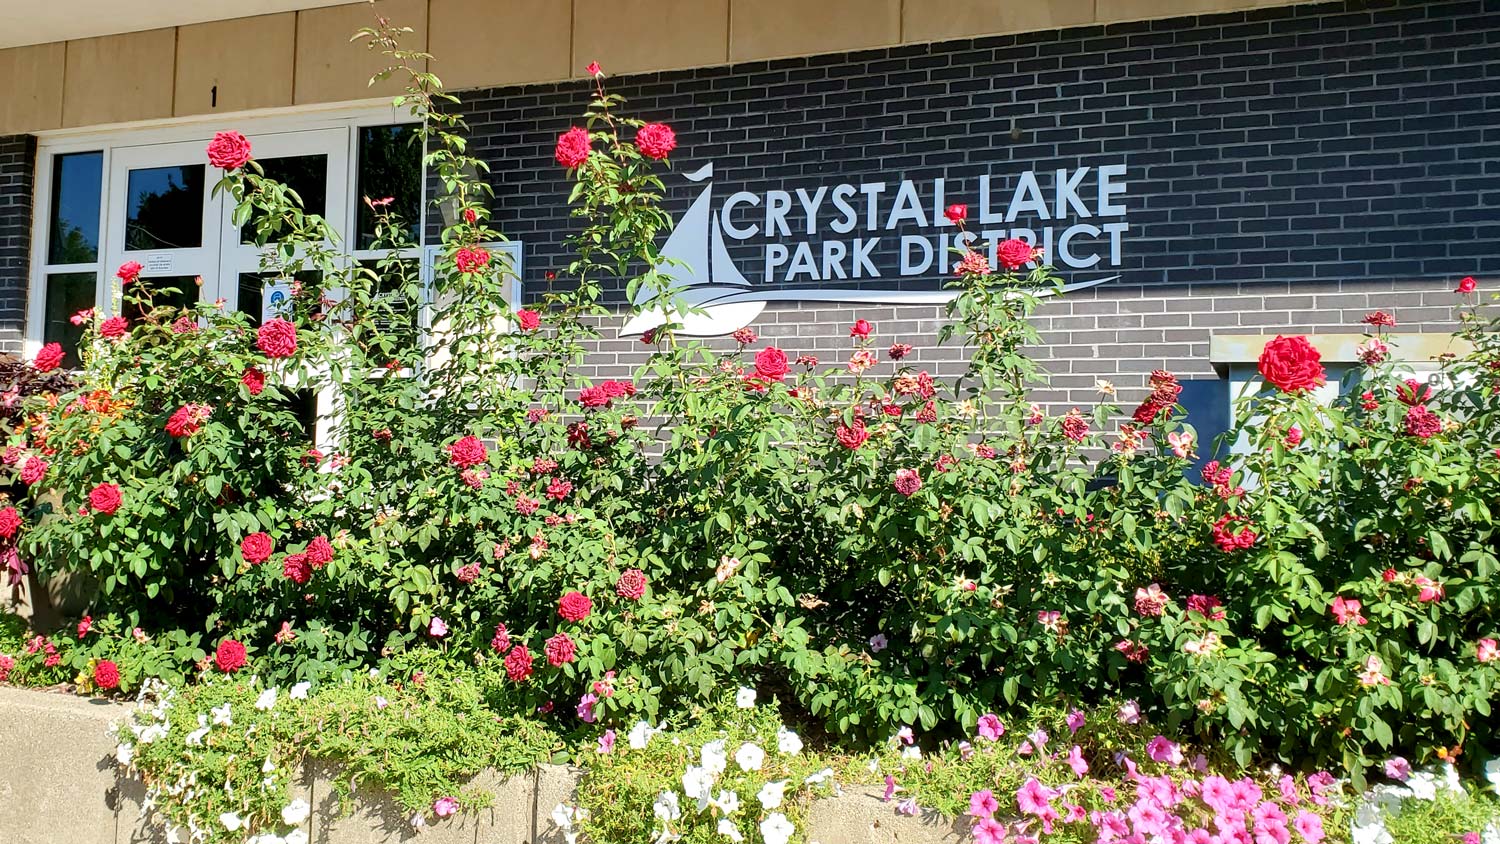 Array of flowers outside the Crystal Lake Park District administration building.